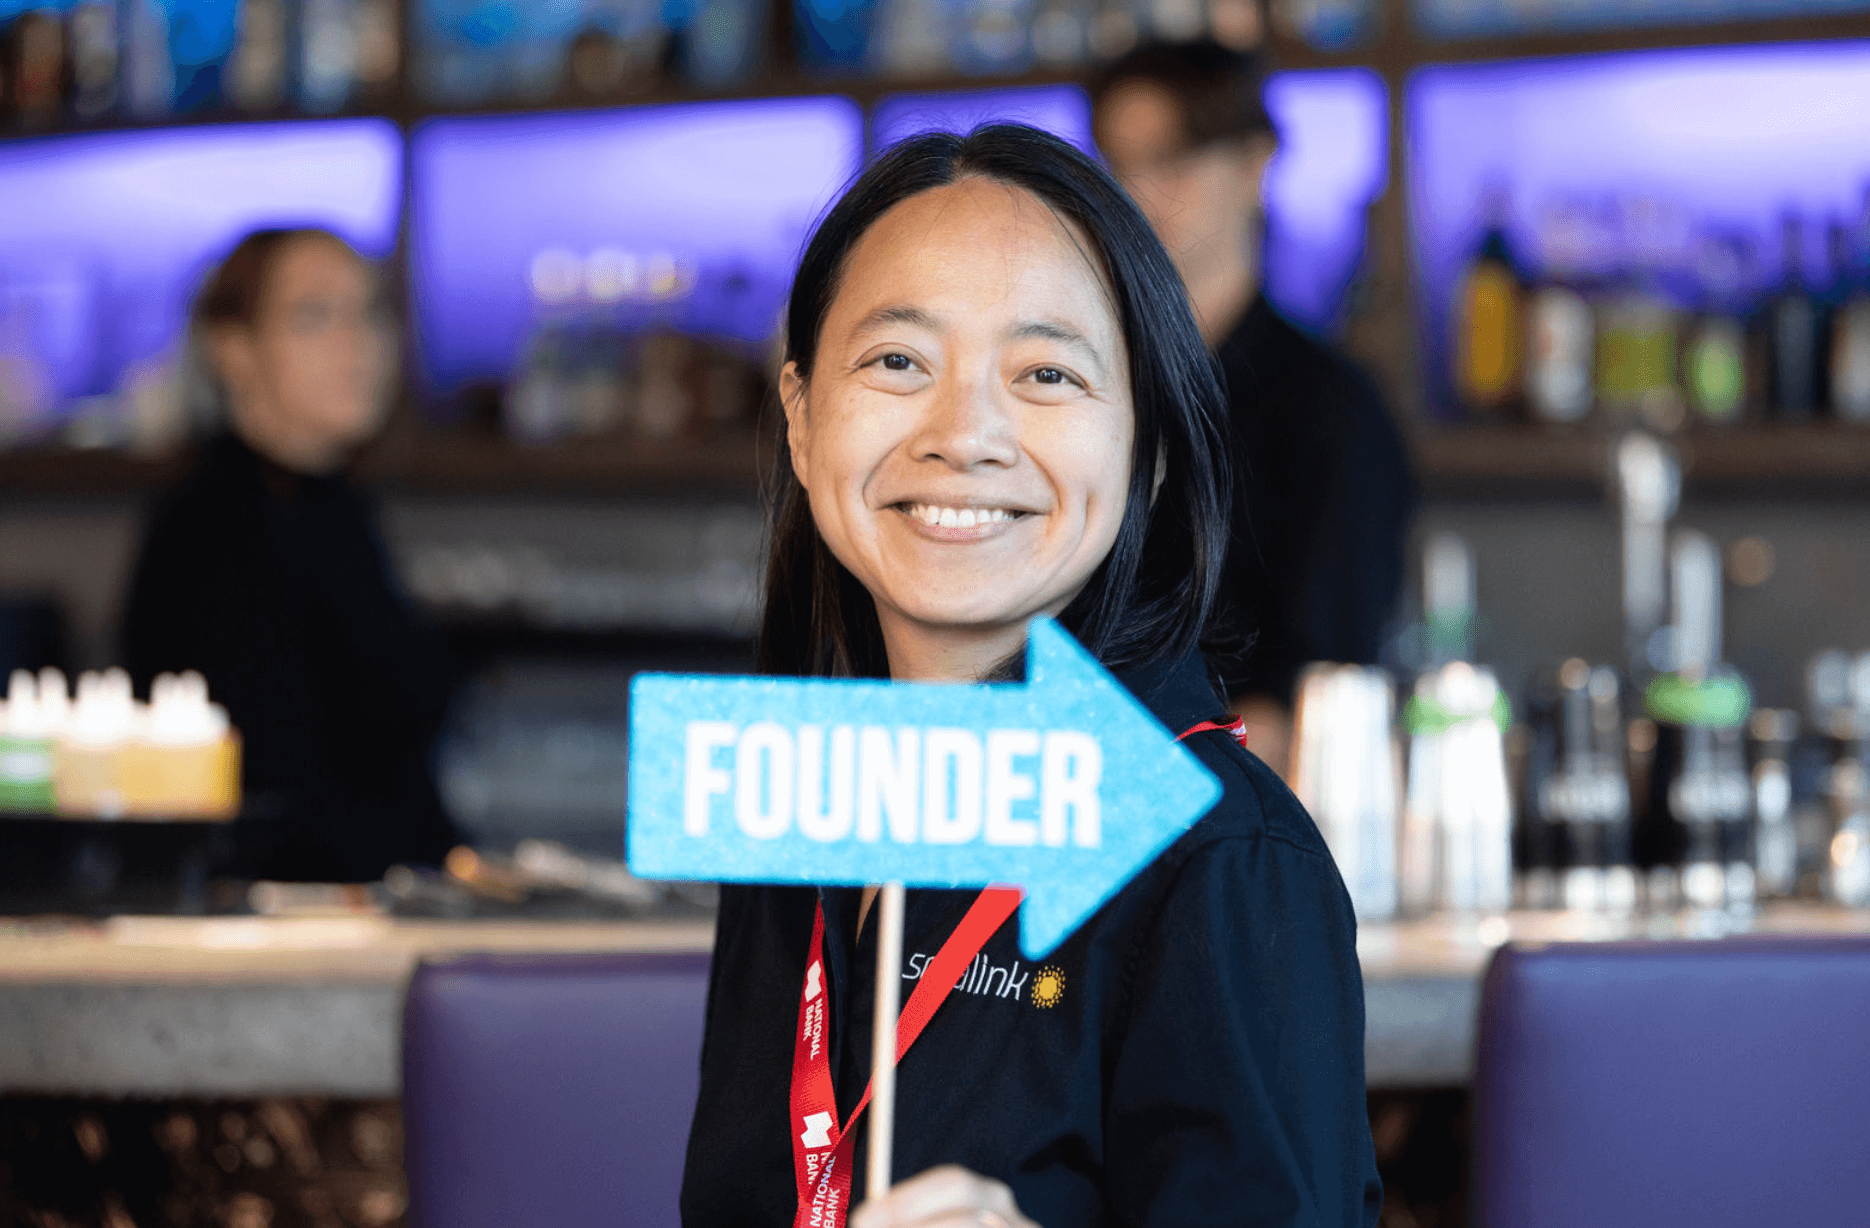 Yun Yao at L-SPARKS's 10th cohort celebration, smiling and holding up a sign that says "FOUNDER", made by Amber at Propmaster.